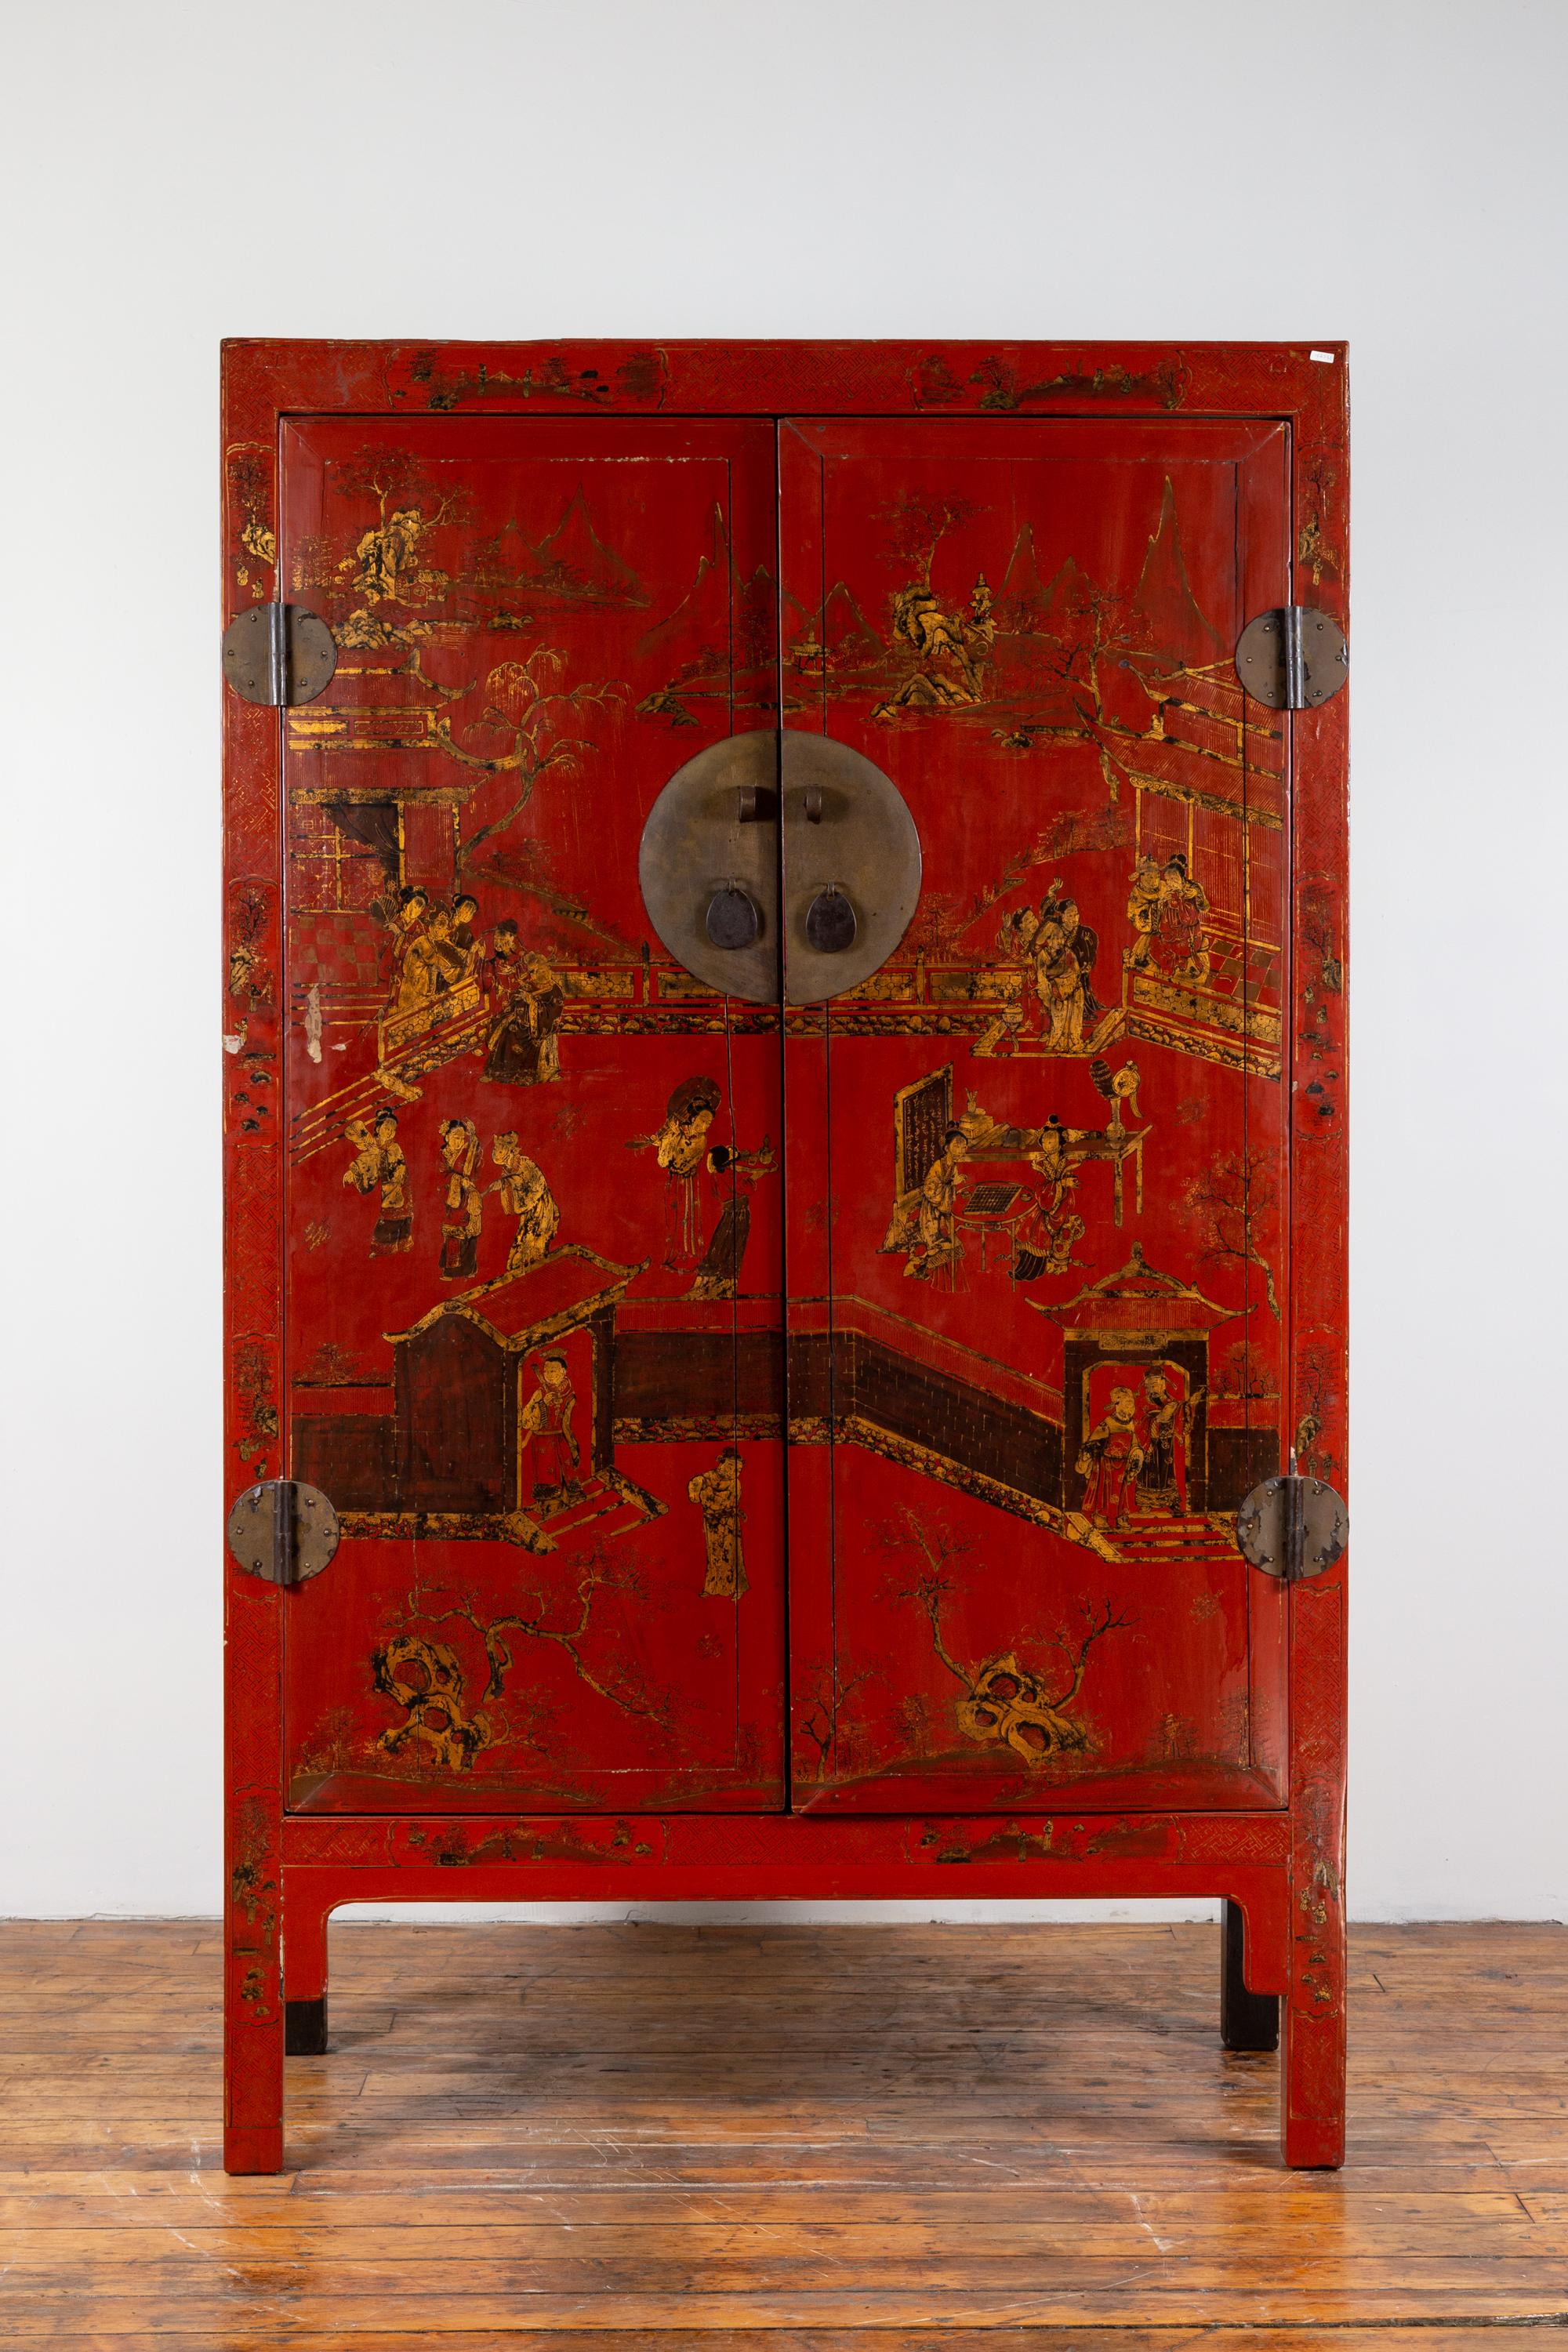 A Chinese Qing dynasty red lacquered cabinet from the 19th century, with gilt chinoiserie décor and hidden drawers. Born in China in the last years of the Qing dynasty, this wedding cabinet features two doors, beautifully adorned with gilt court